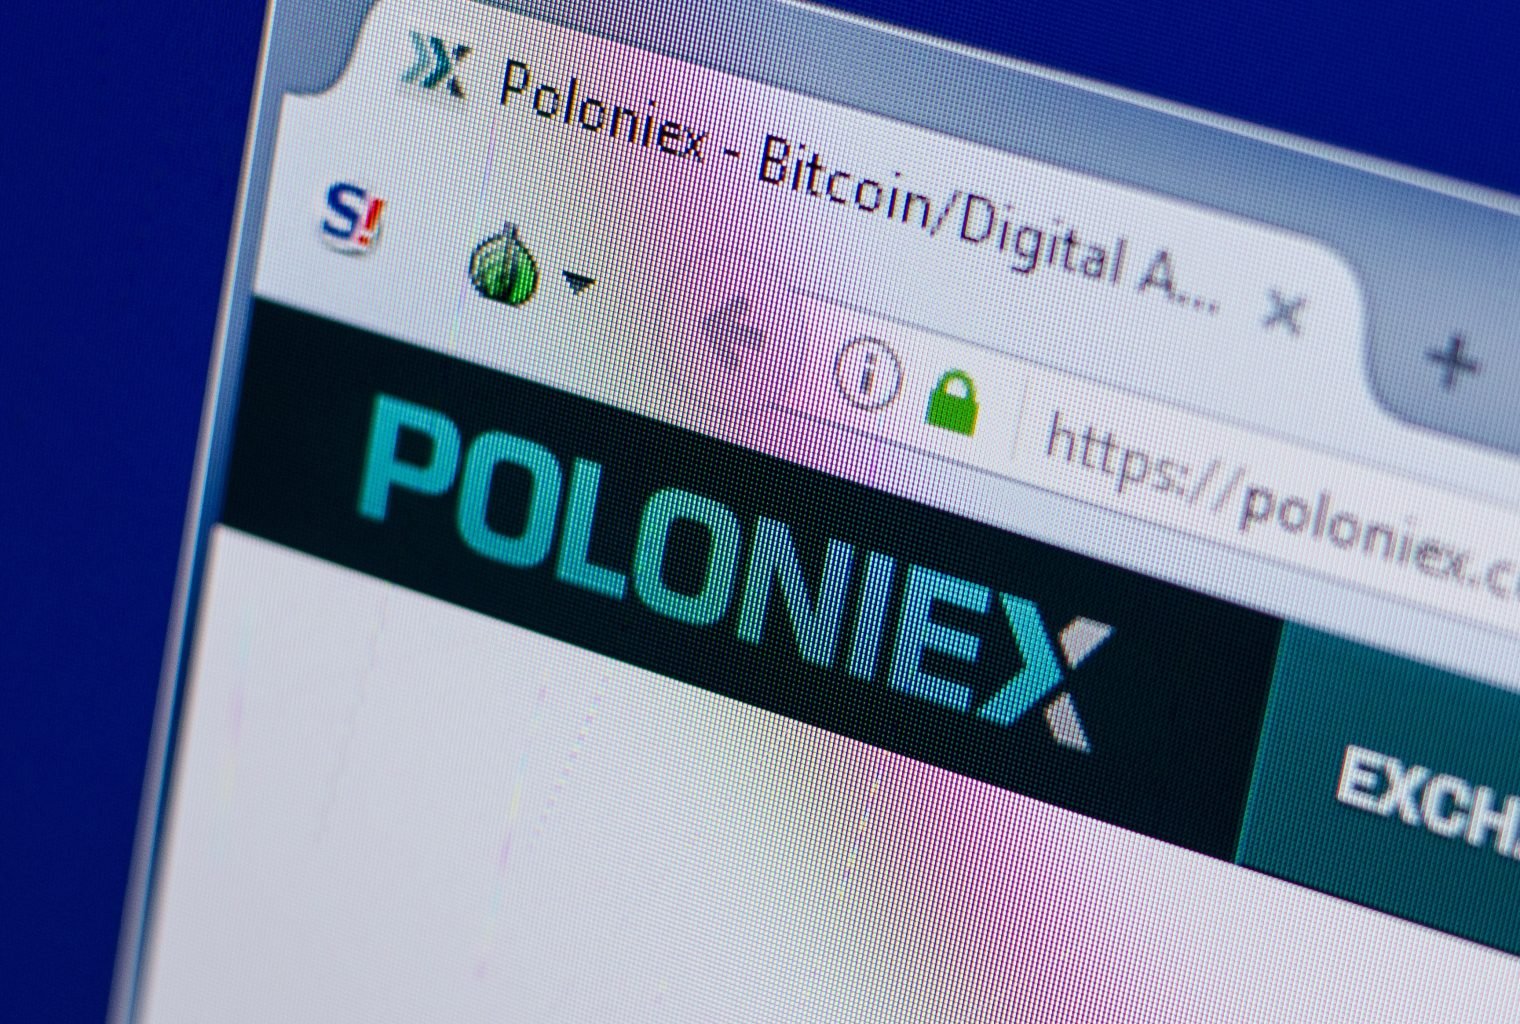 Poloniex enables GrinMW withdrawals by donating 1.27864 BTC to Grin General Fund